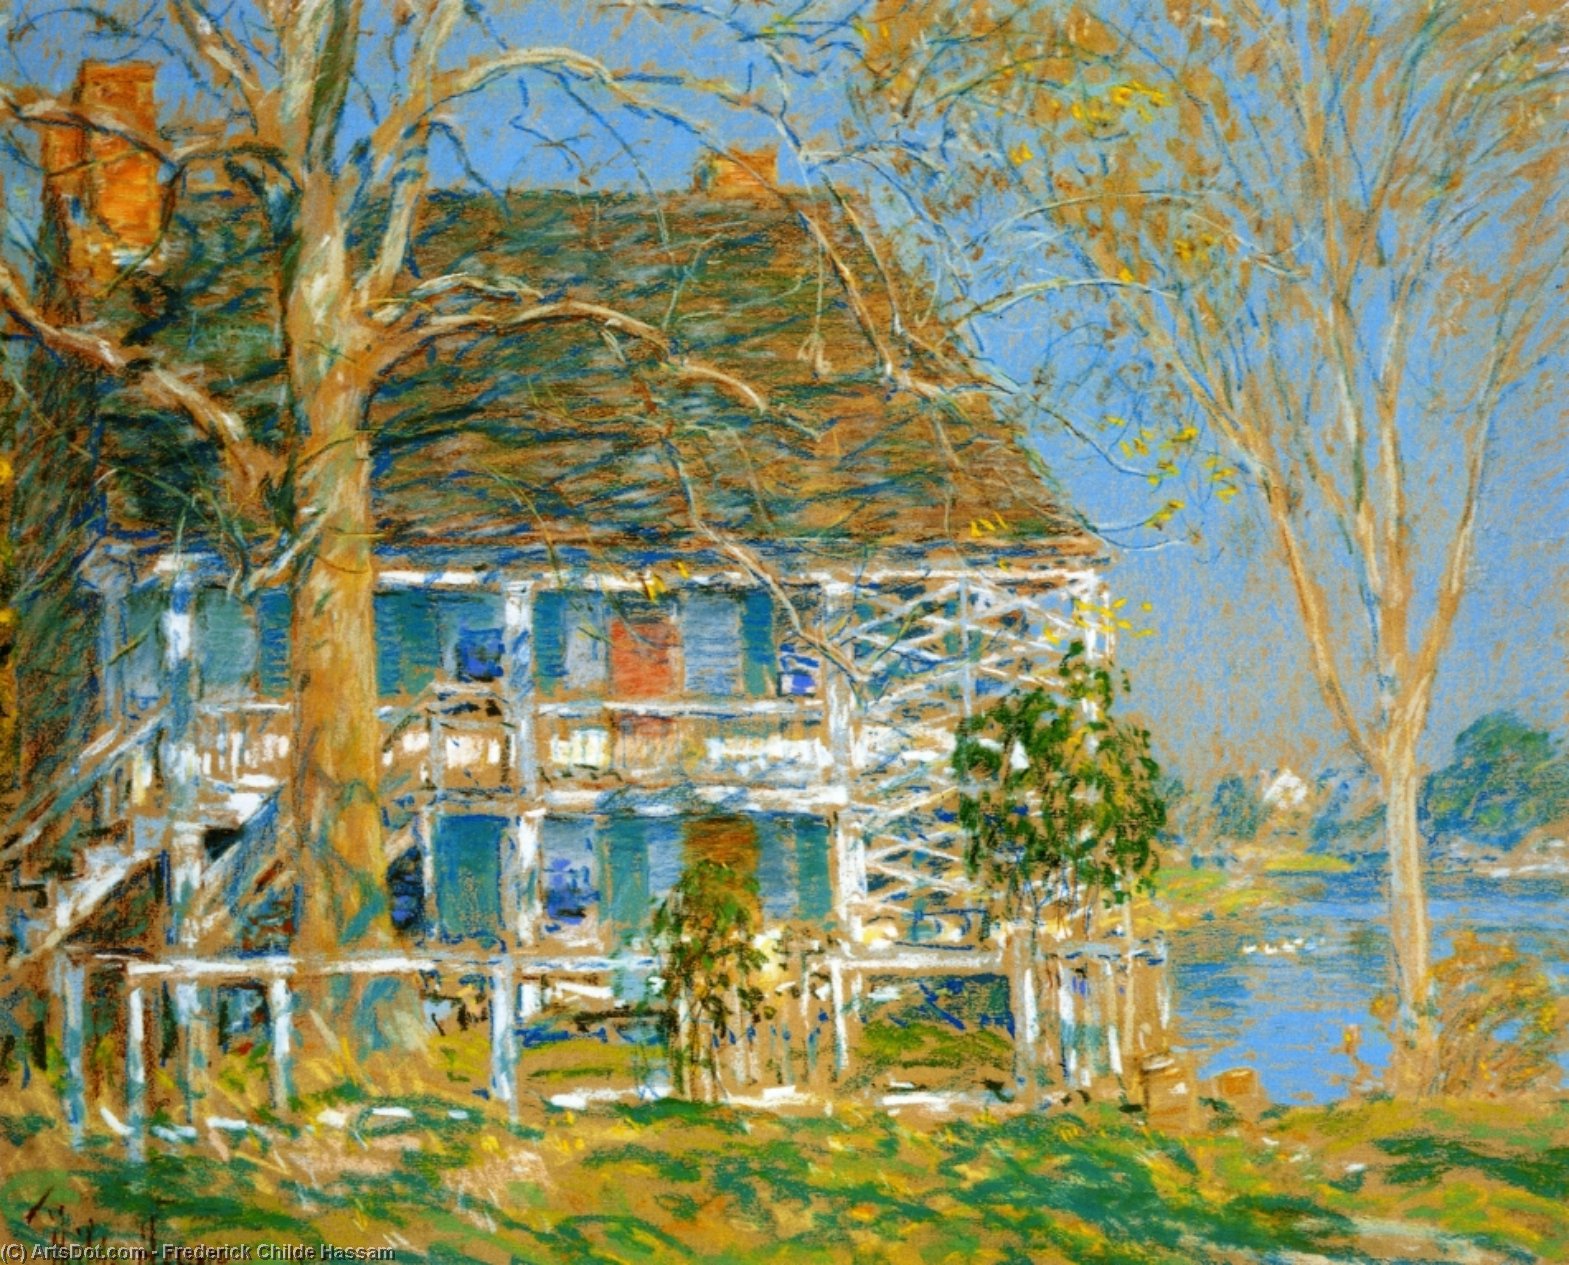 WikiOO.org - Encyclopedia of Fine Arts - Malba, Artwork Frederick Childe Hassam - Unknown (also known as The Old Brush House)